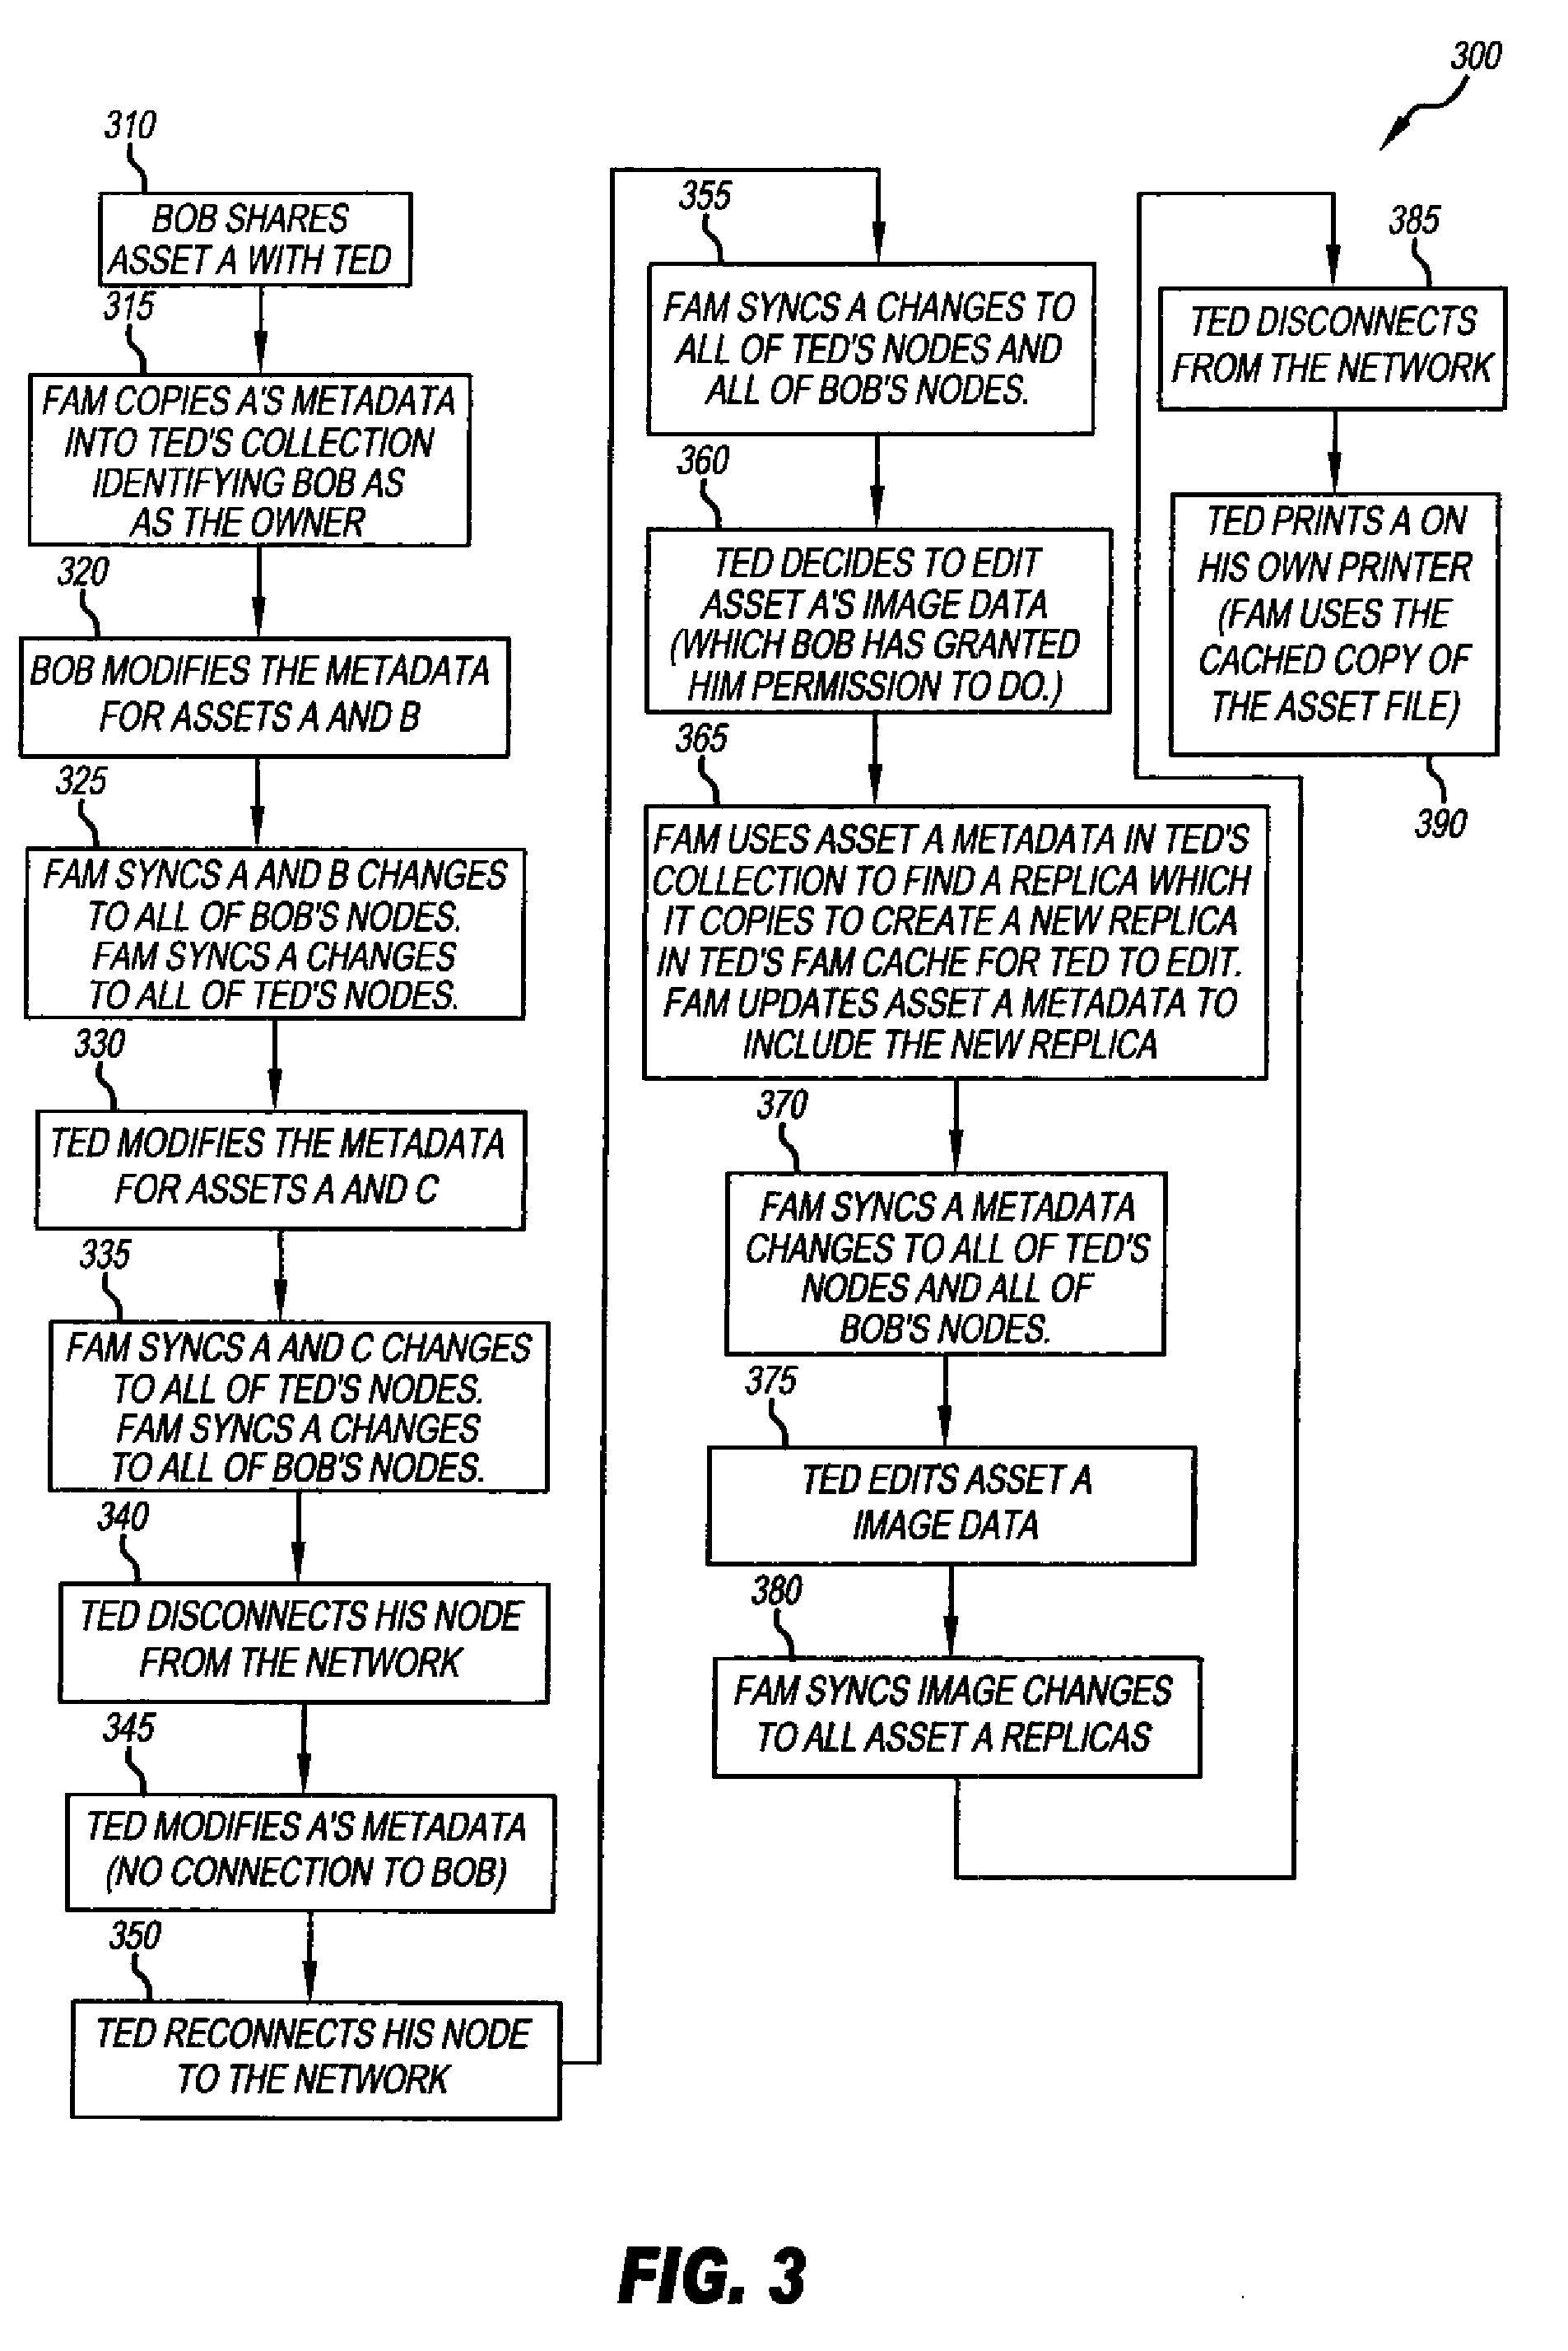 System for managing distributed assets and medadata